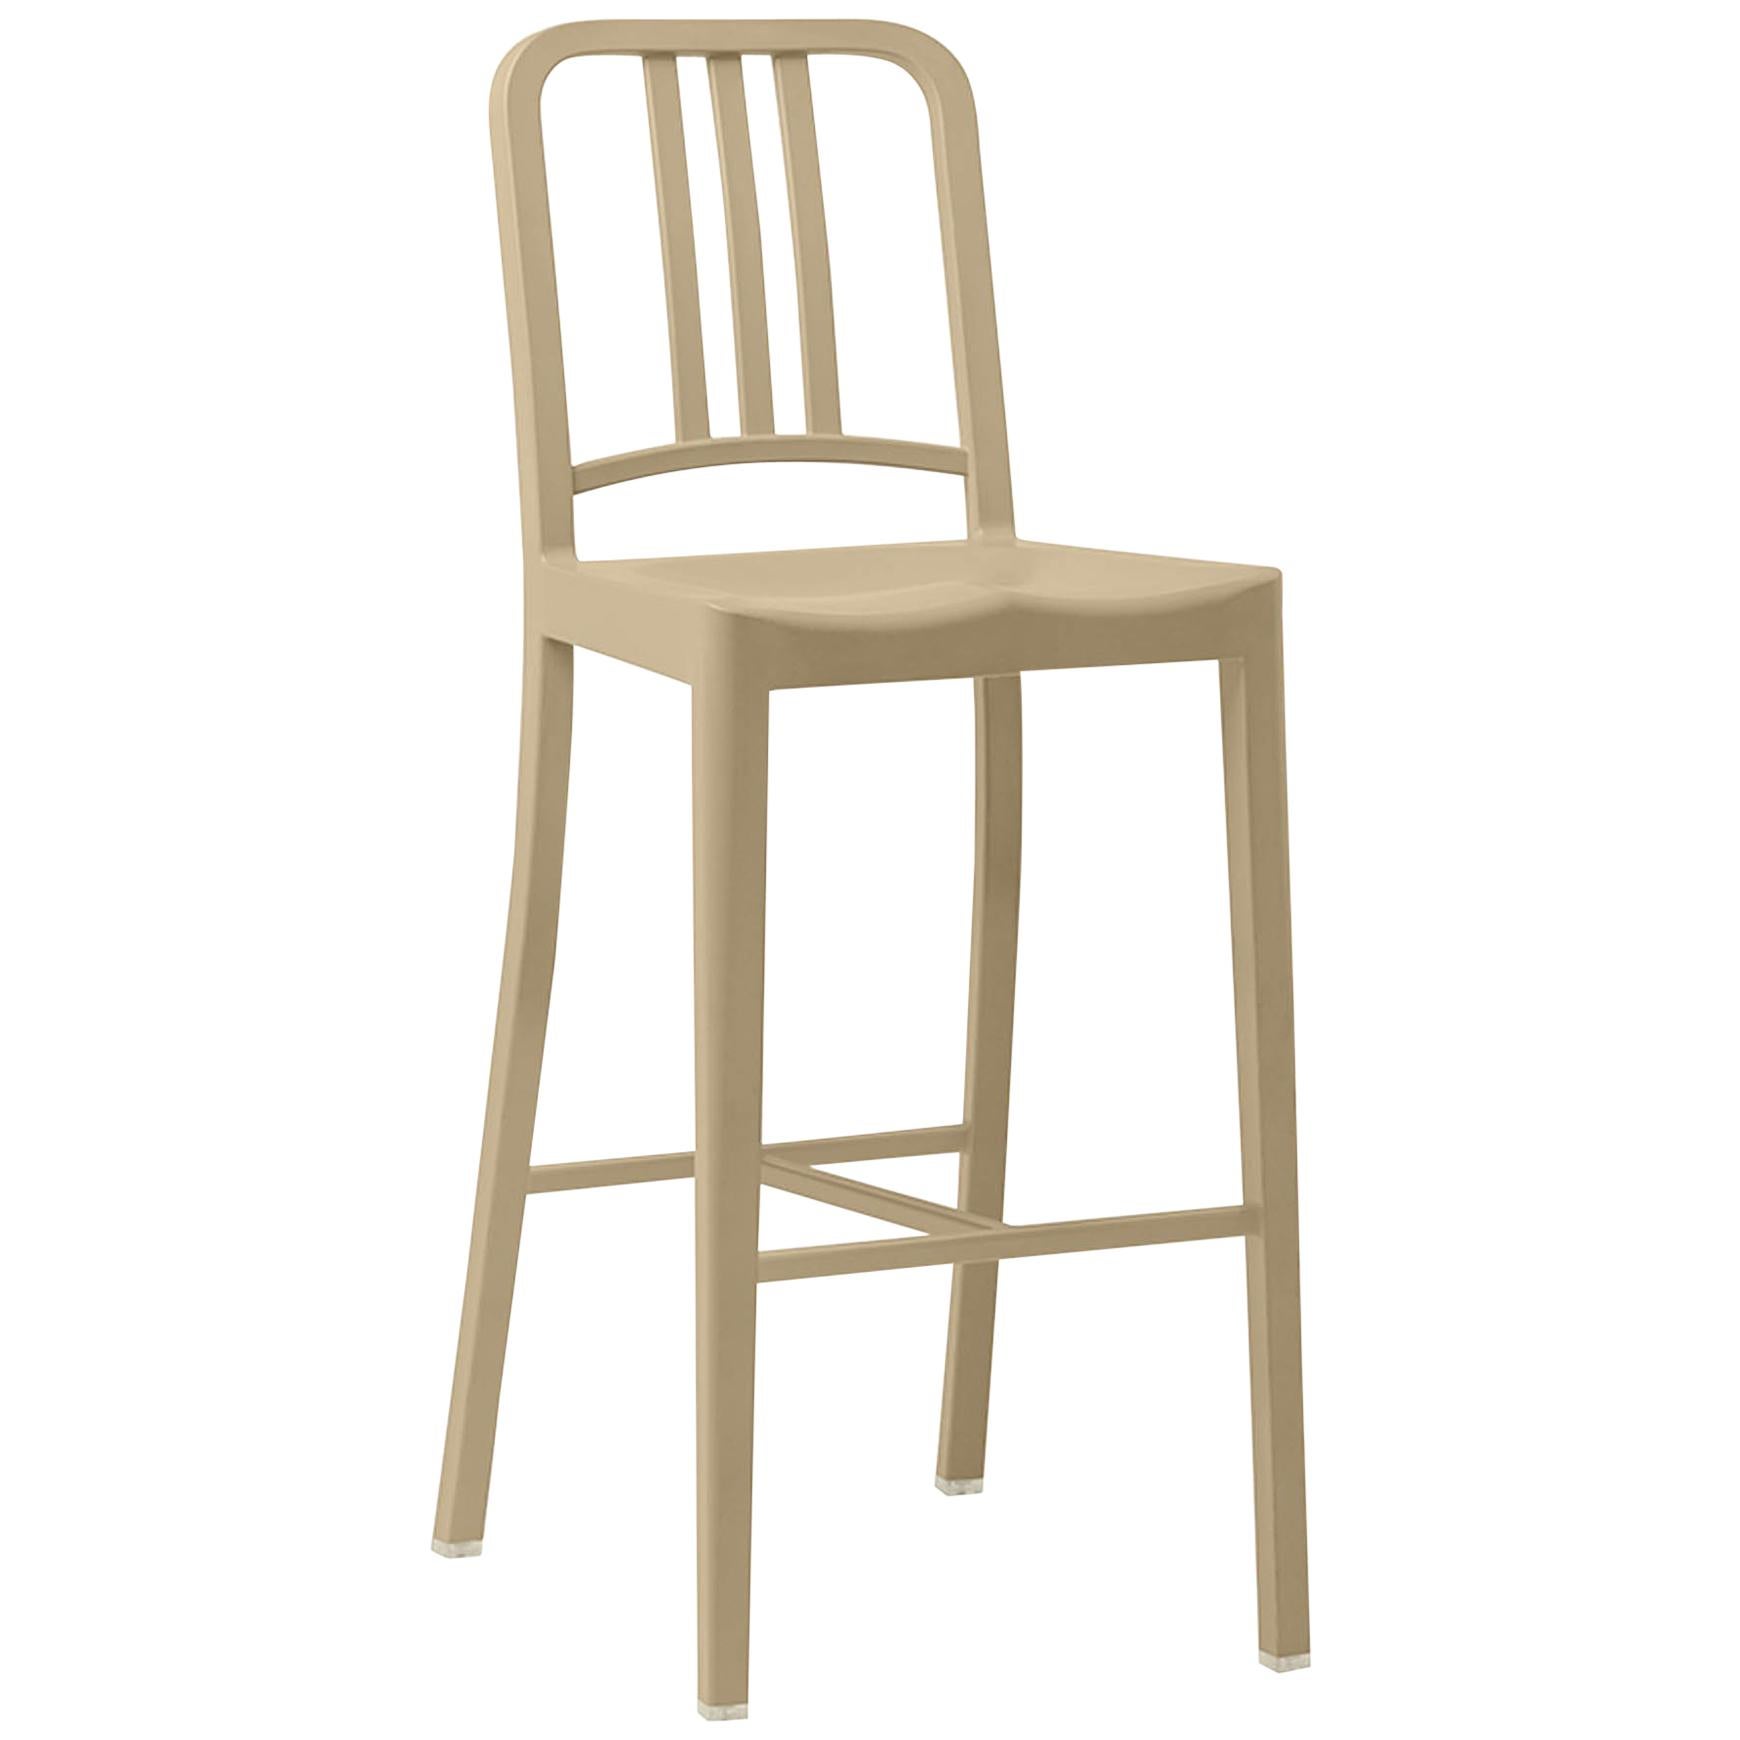 Emeco 111 Navy Barstool in Beach by Coca-Cola